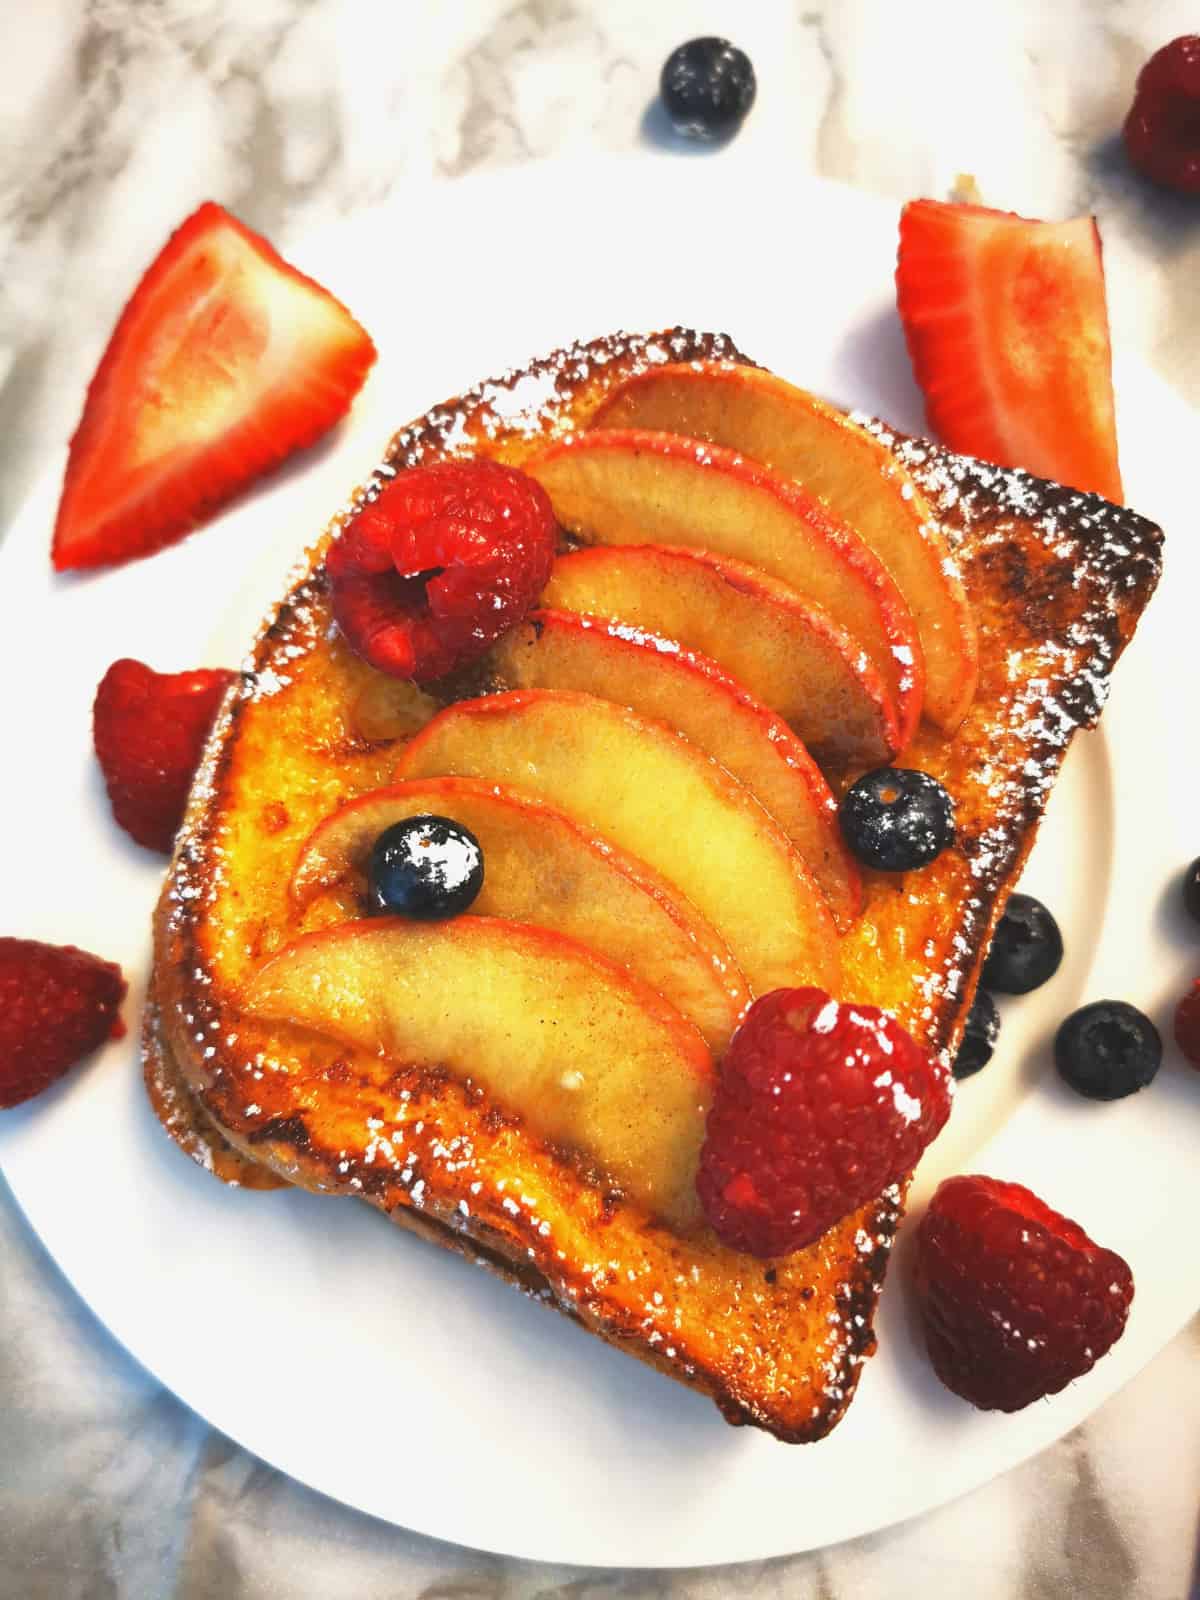 Apple Cinnamon French Toast with blueberries, strawberries and raspberries